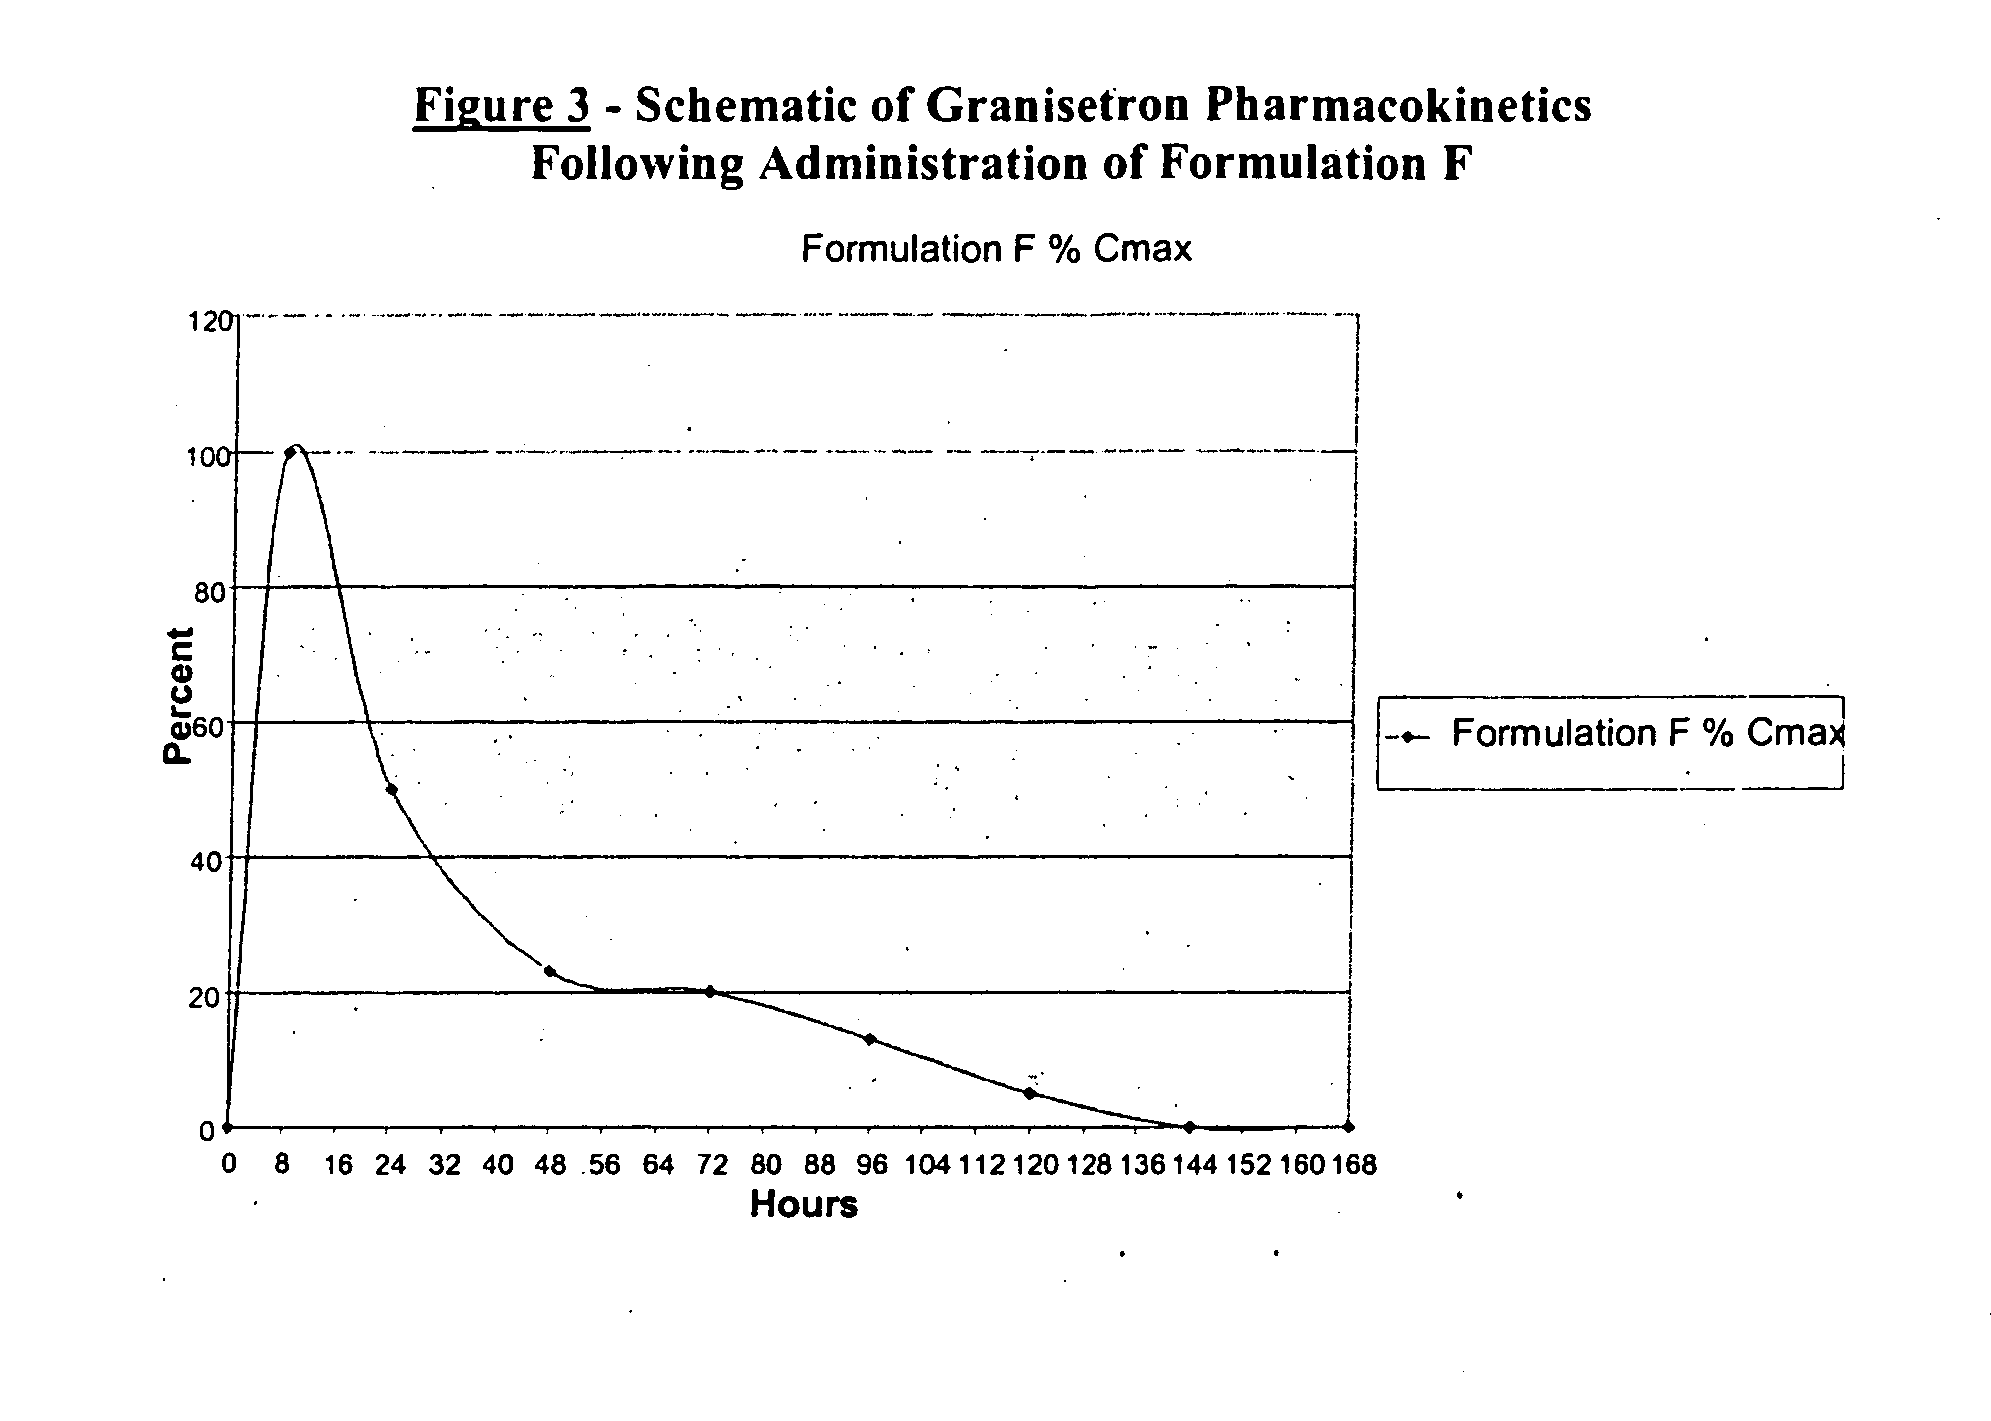 Methods for the prevention of acute and delayed chemotherapy-induced nausea and vomiting (CINV)